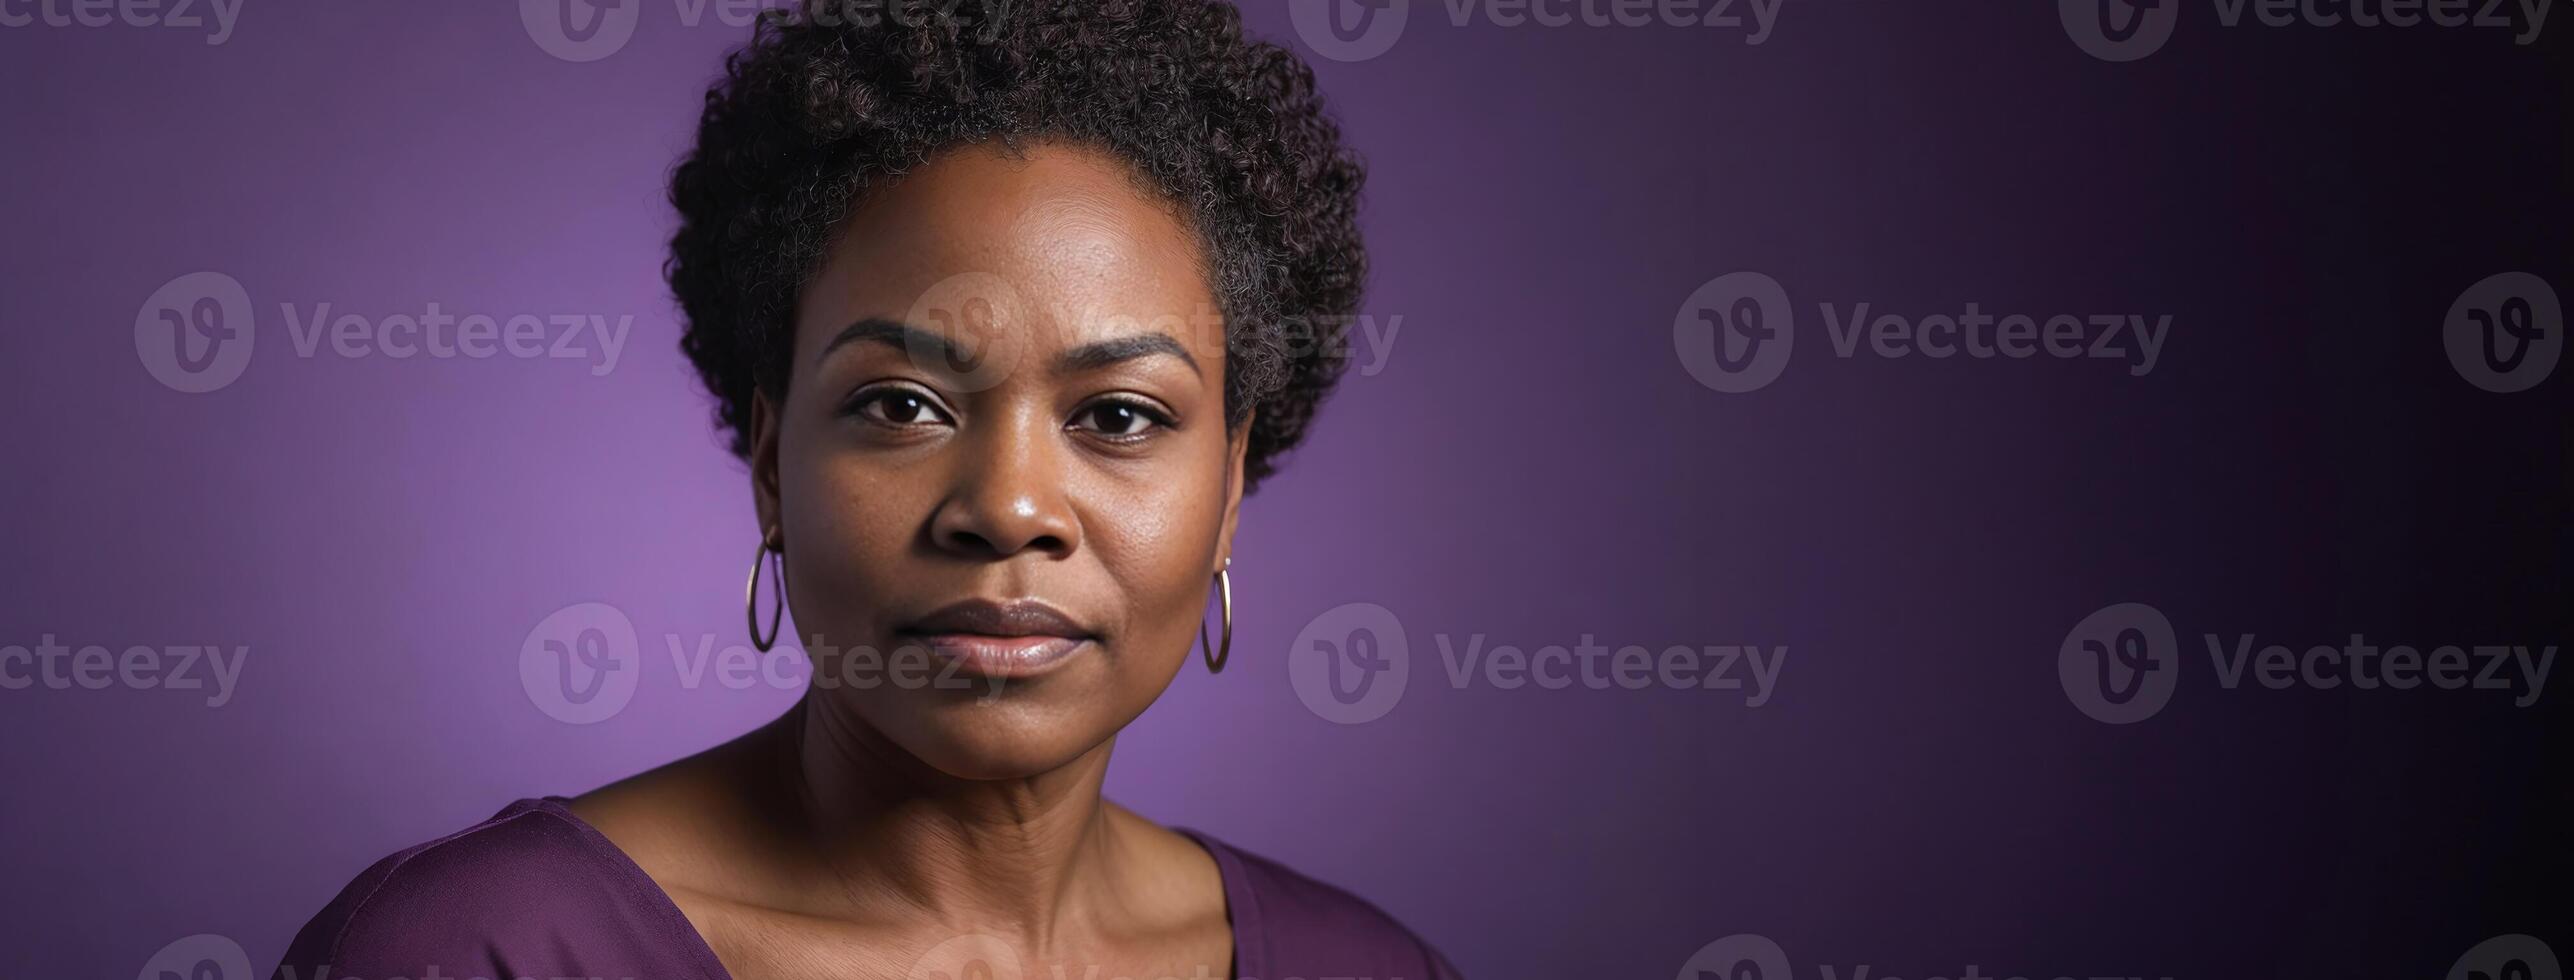 A 50S Adult African American Woman Isolated On A Purple Background With Copy Space. photo